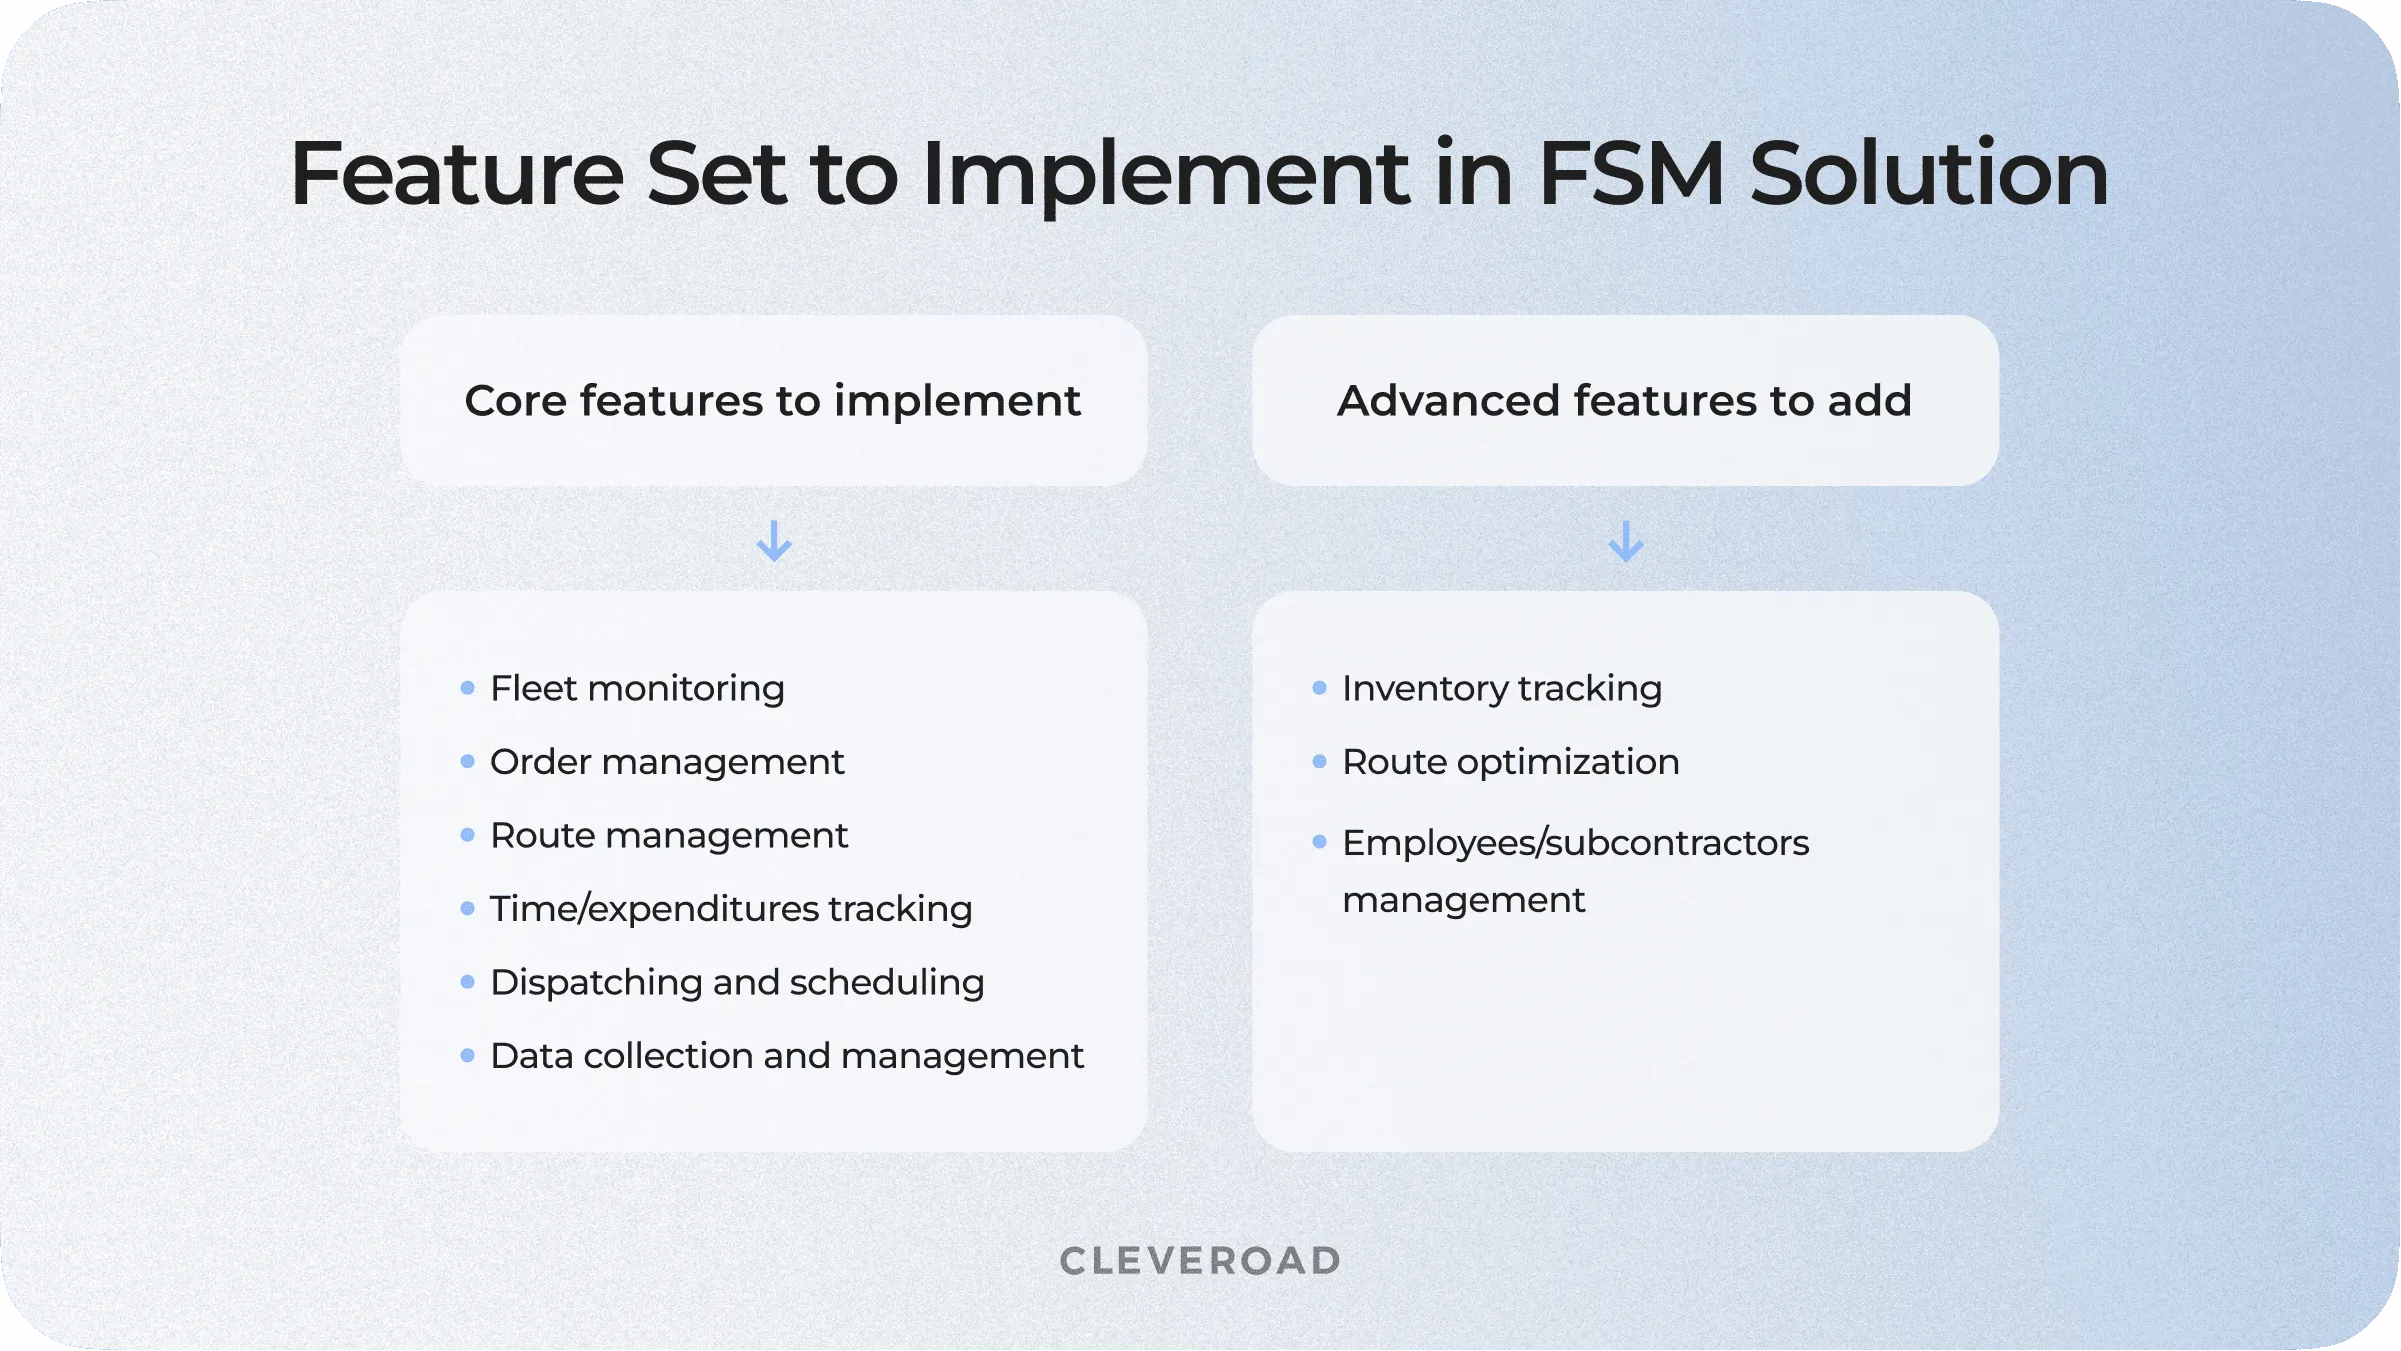 Feature set to implement in FSM solution